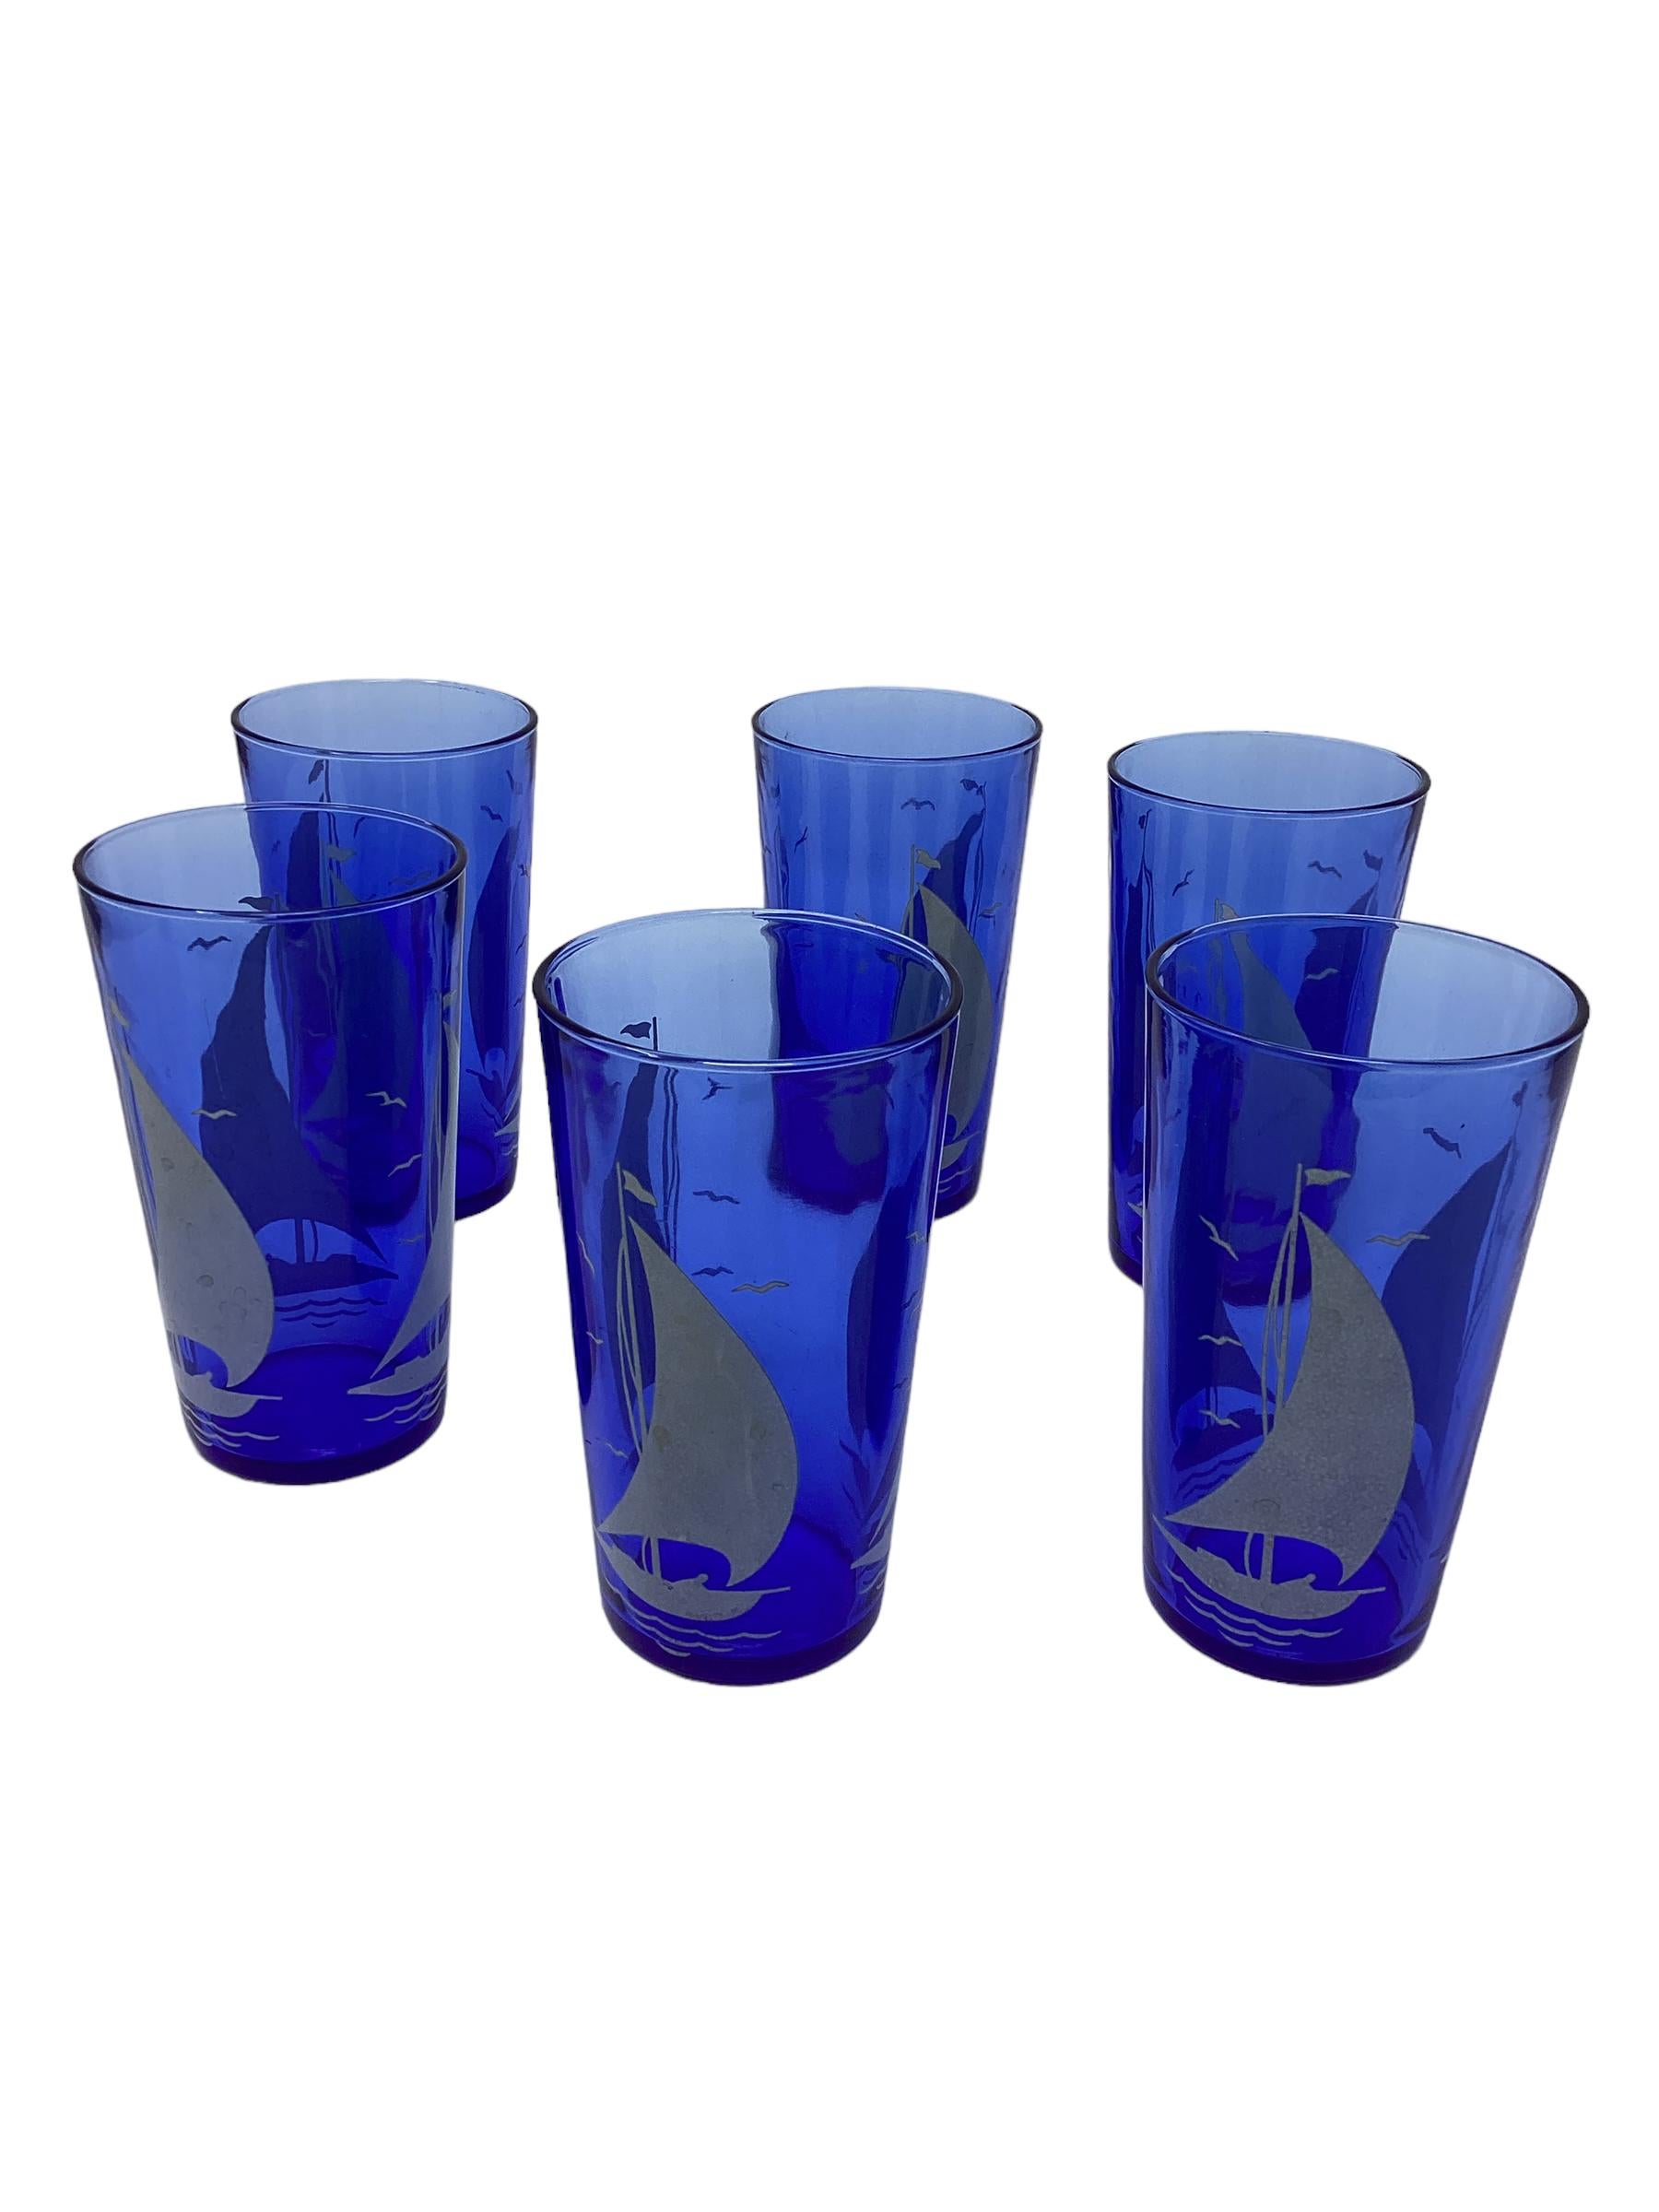 Set of 6 Hazel-Atlas Sailboats Tumblers In Good Condition For Sale In Chapel Hill, NC